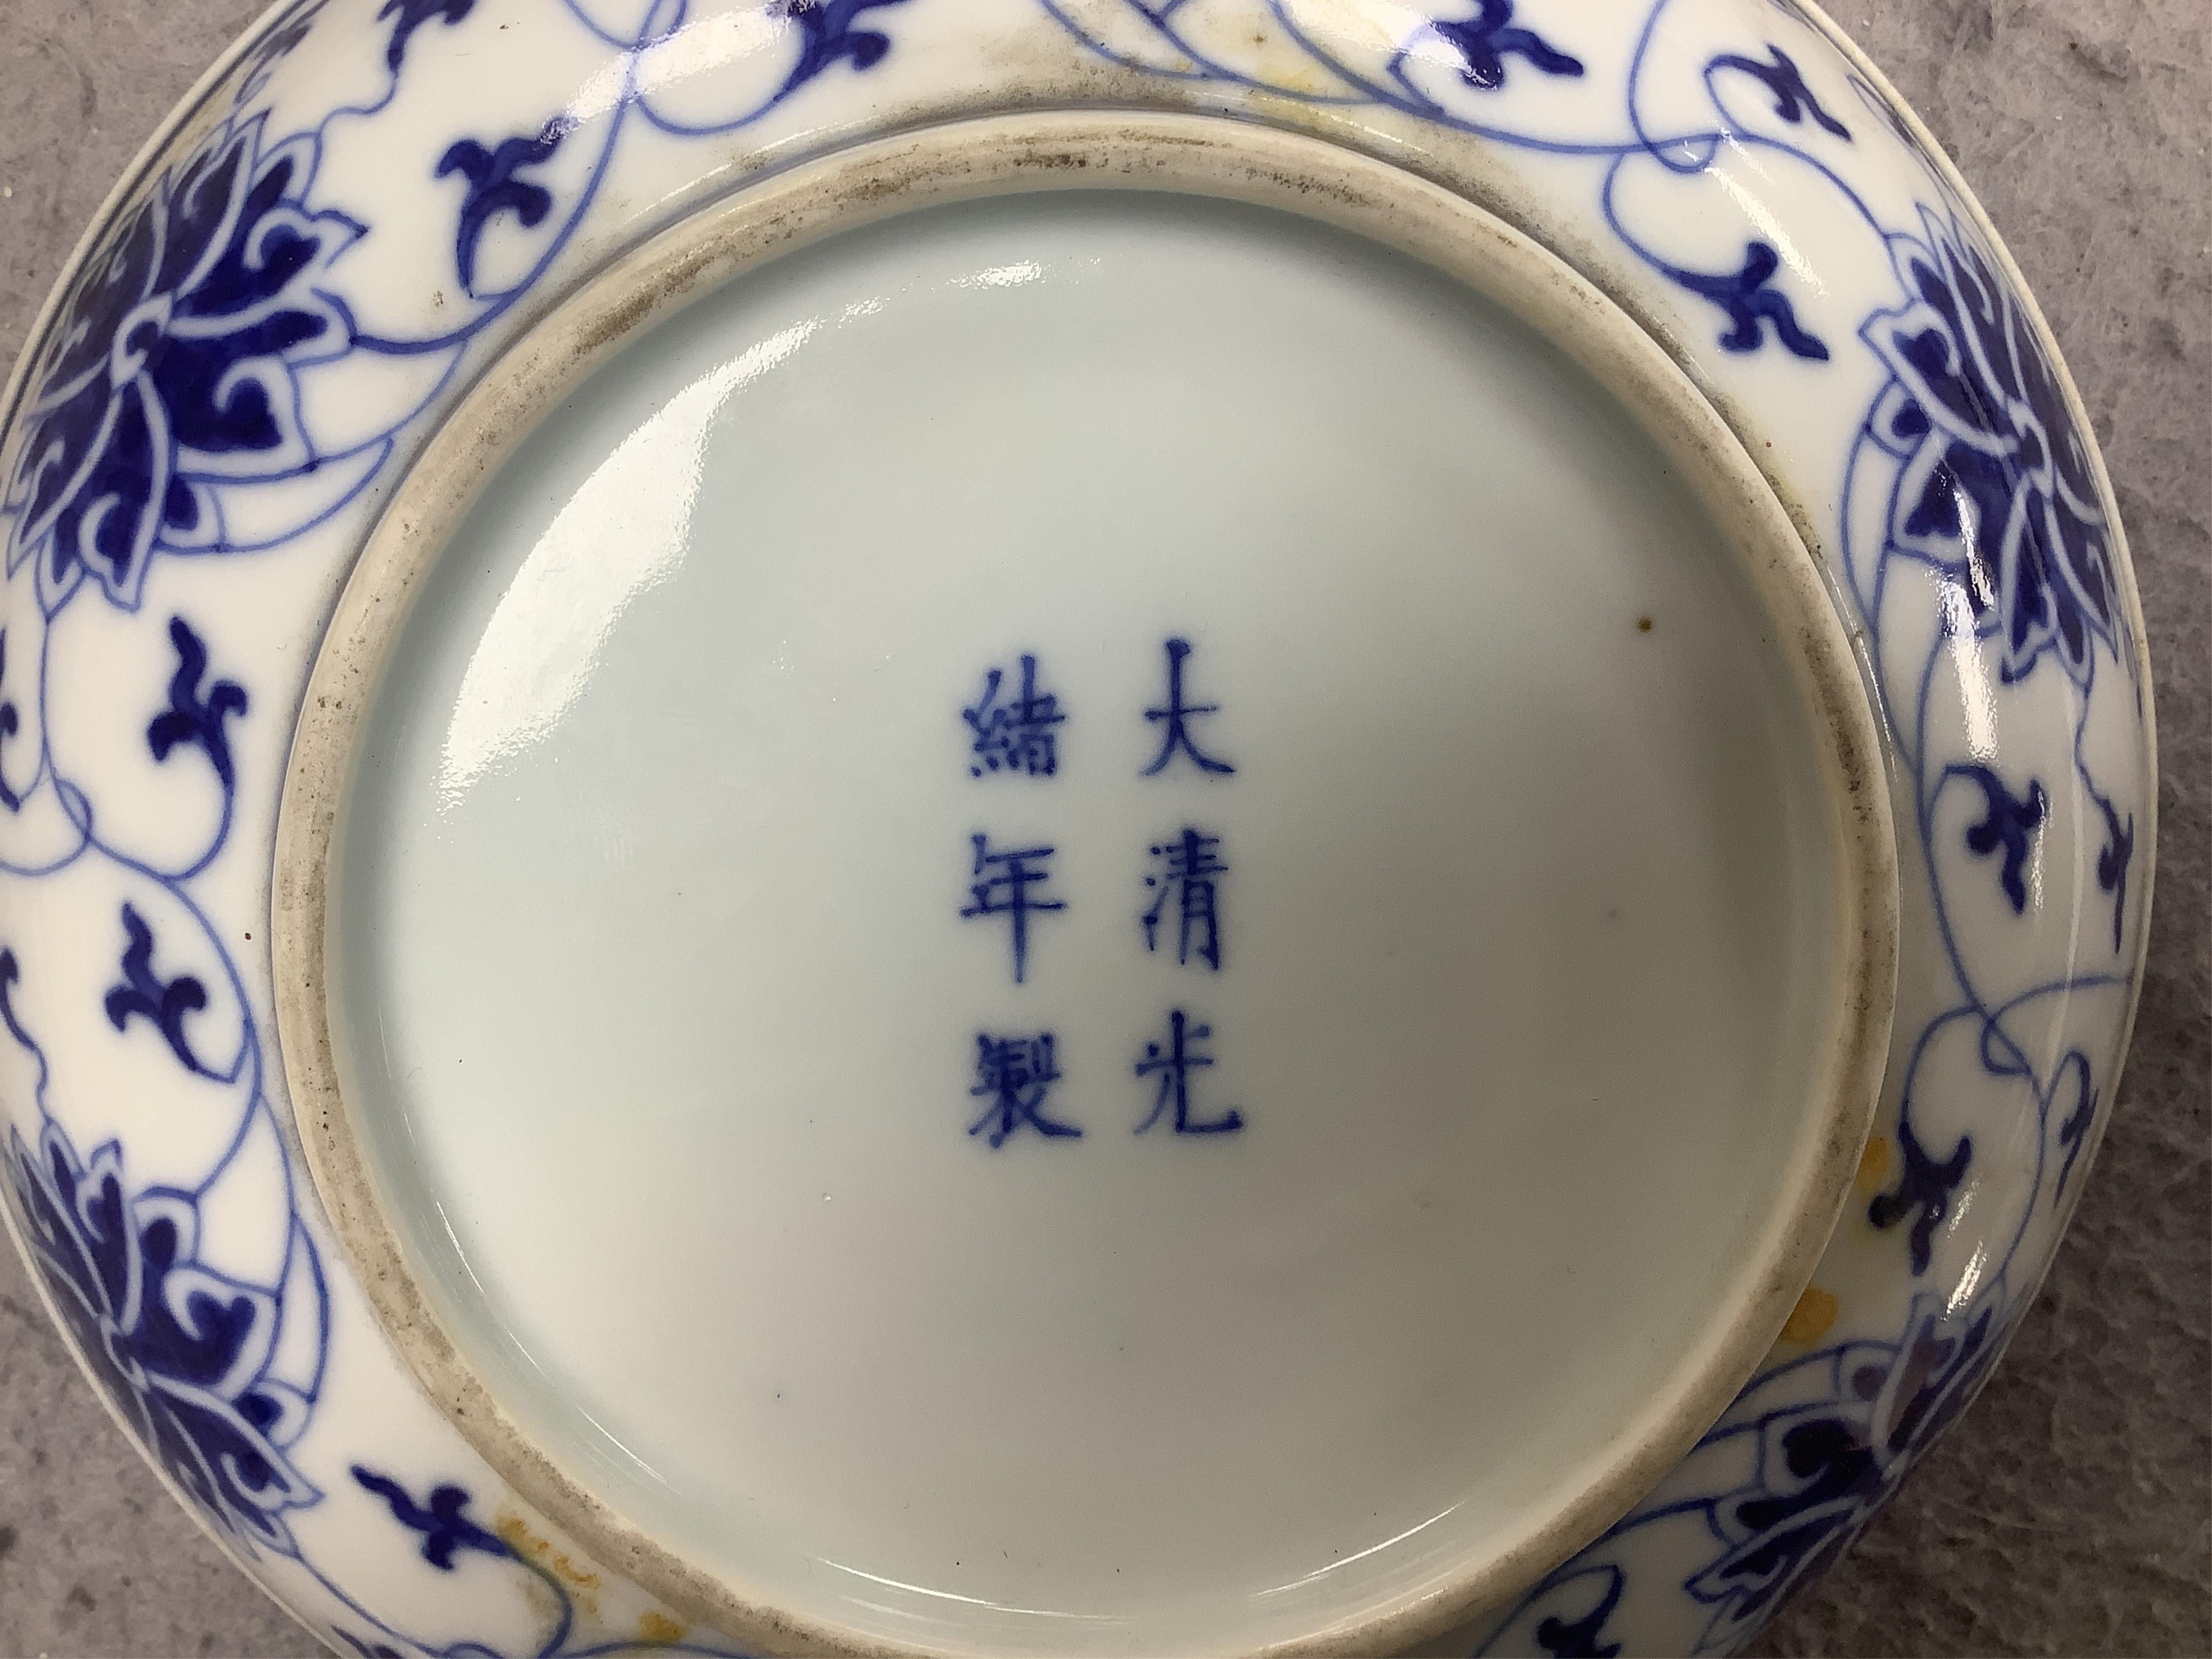 A Chinese blue and white lotus saucer dish, Guangxu mark and of the period (1875-1908), 15.5cm diameter